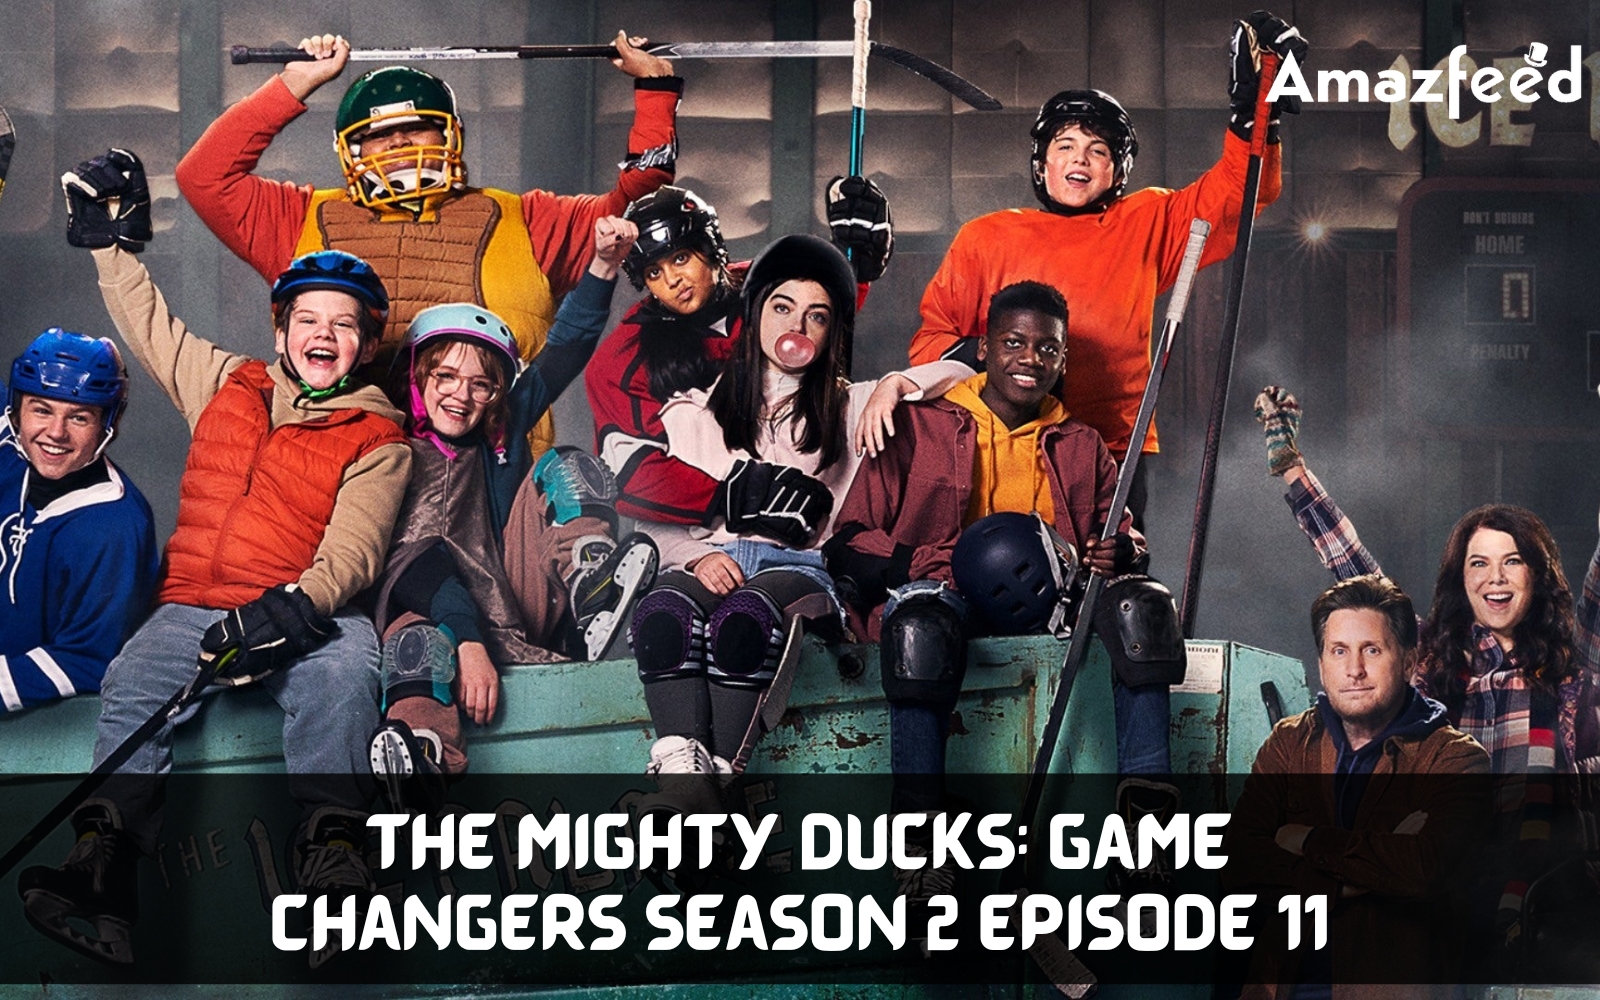 The Mighty Ducks Game Changers season 2 Episode 11